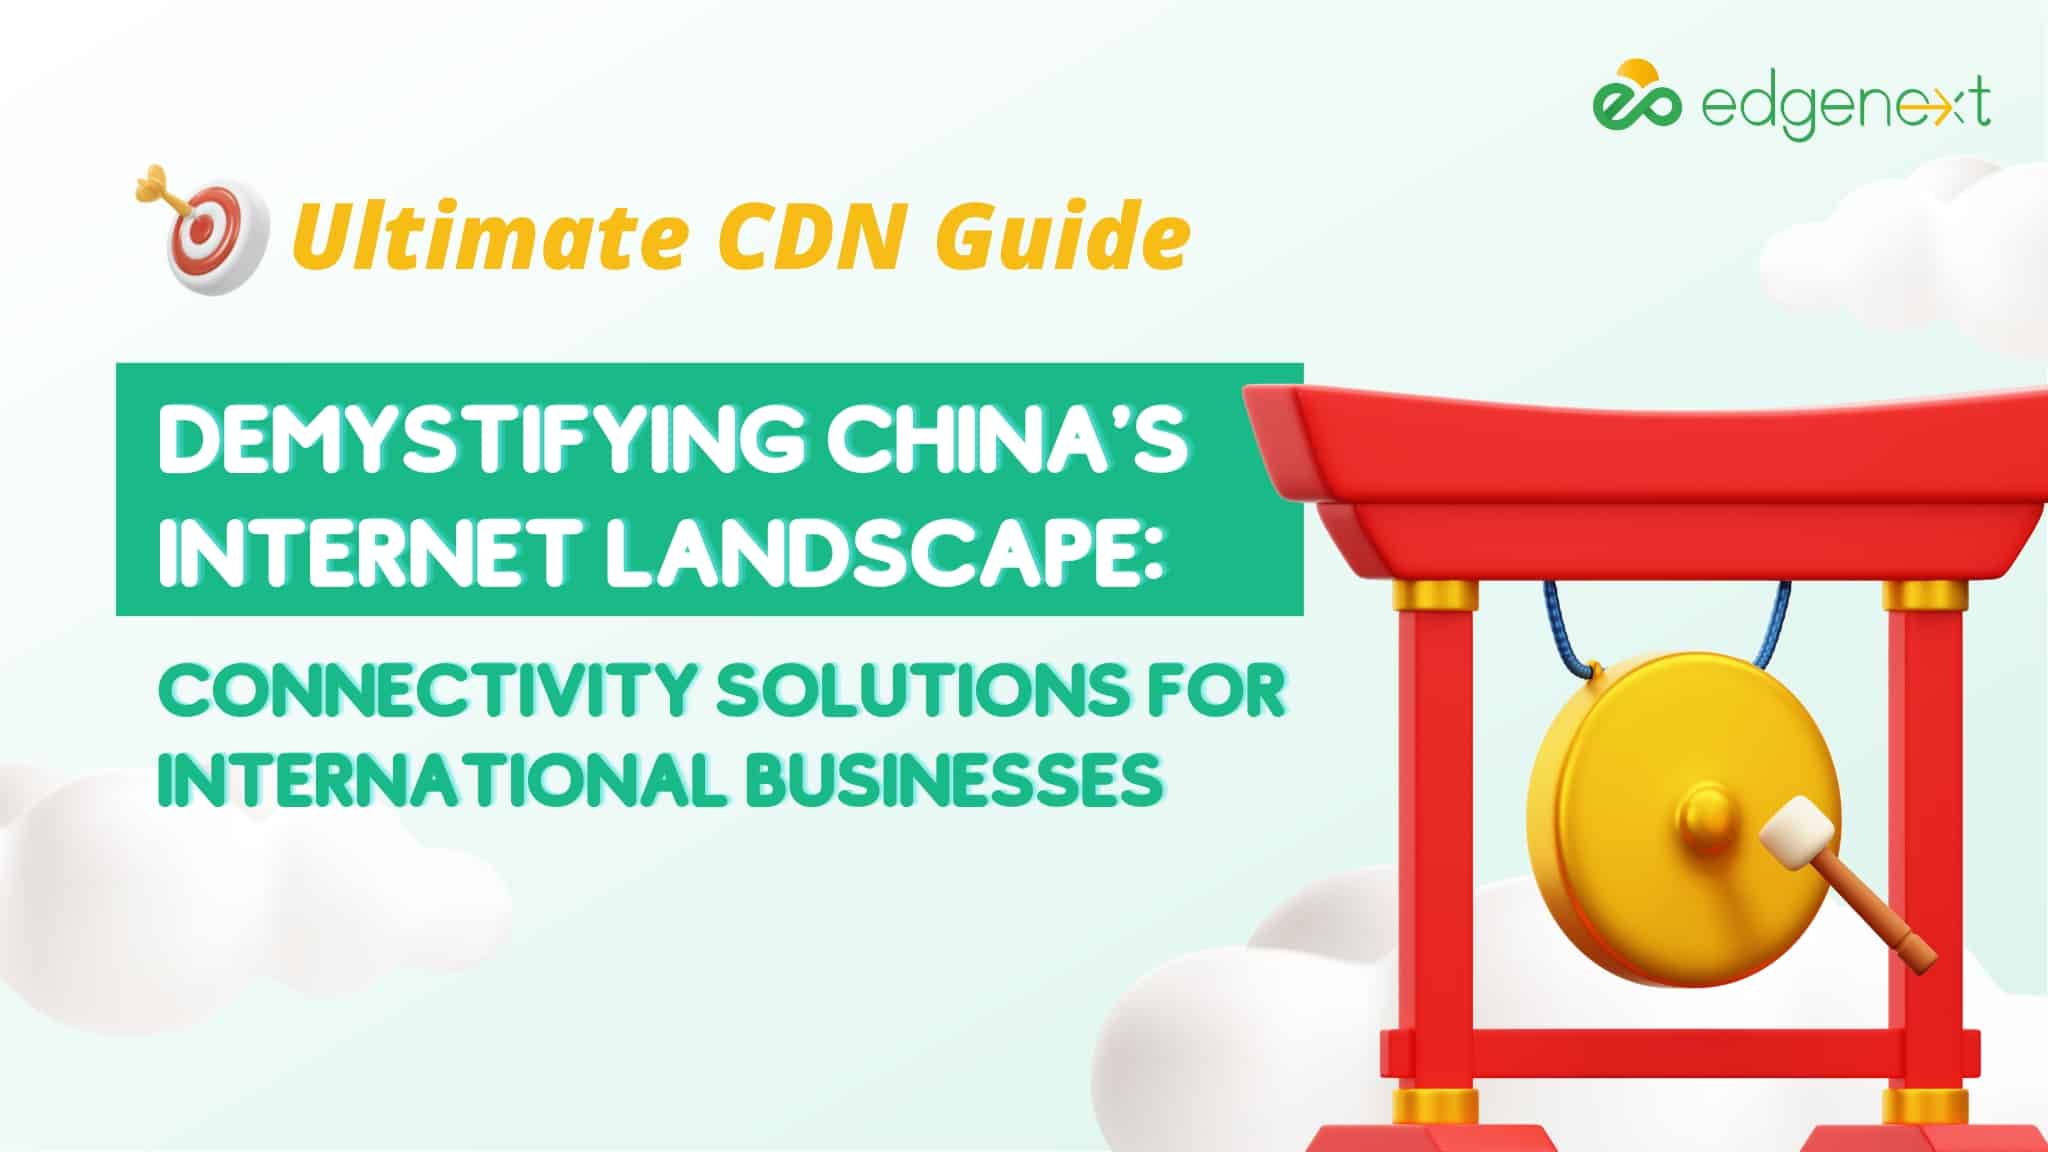 Demystifying China’s Internet Landscape: Connectivity Solutions for International Businesses